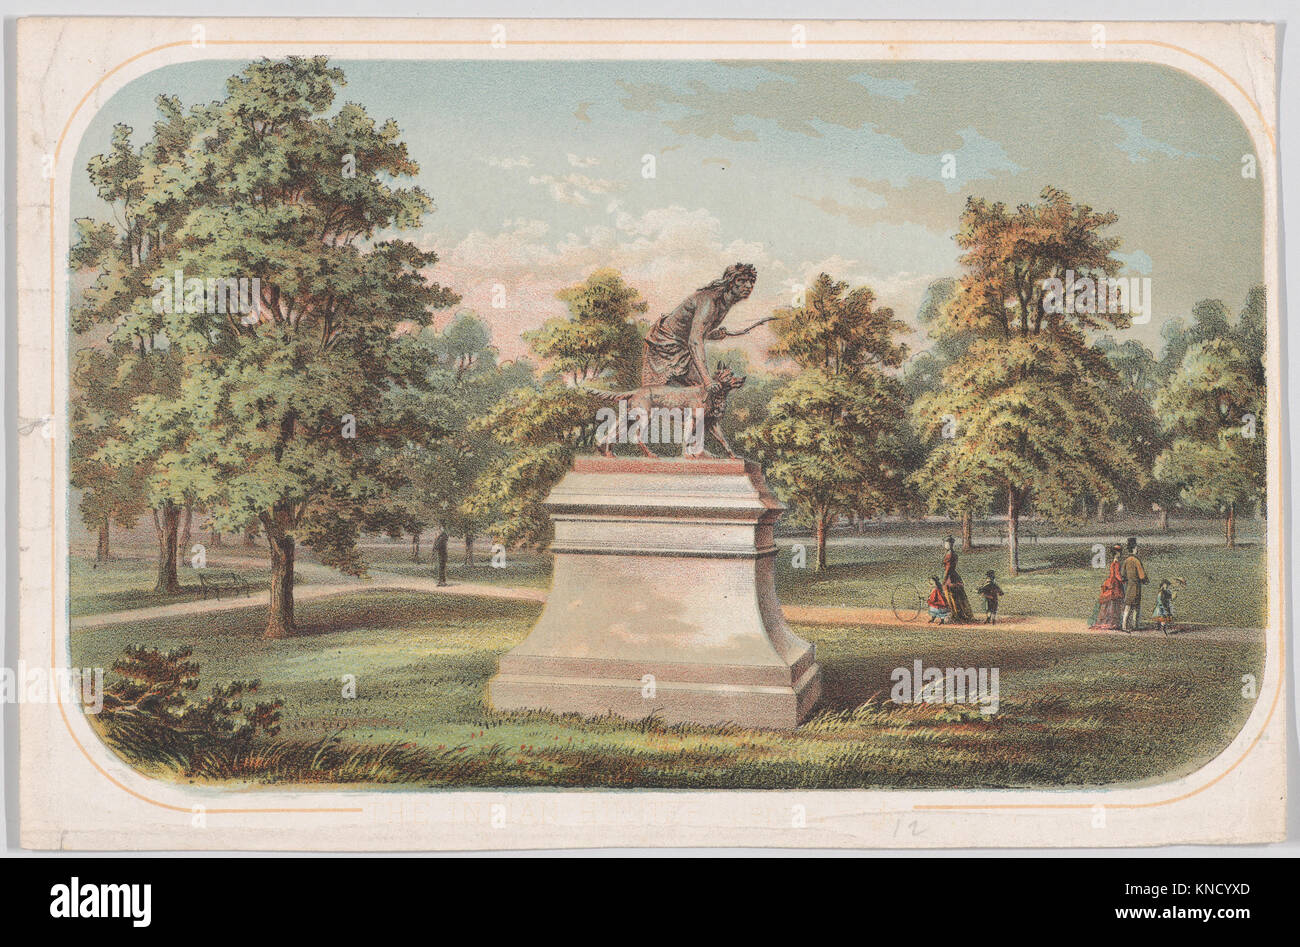 Central Park, Statue of the Indian Hunter Artist: Anonymous, American, 19th century, Artist: Sculpted by John Quincy Adams Ward, American, Urbana, Ohio 1830-1910 New York, Central Park, Statue of the Indian Hunter, 1869, Hand-colored lithograph, image: 4 13/16 x 8 in. (12.3 x 20.3 cm) sheet: 5 9/16 x 8 7/16 in. (14.1 x 21.5 cm). Stock Photo